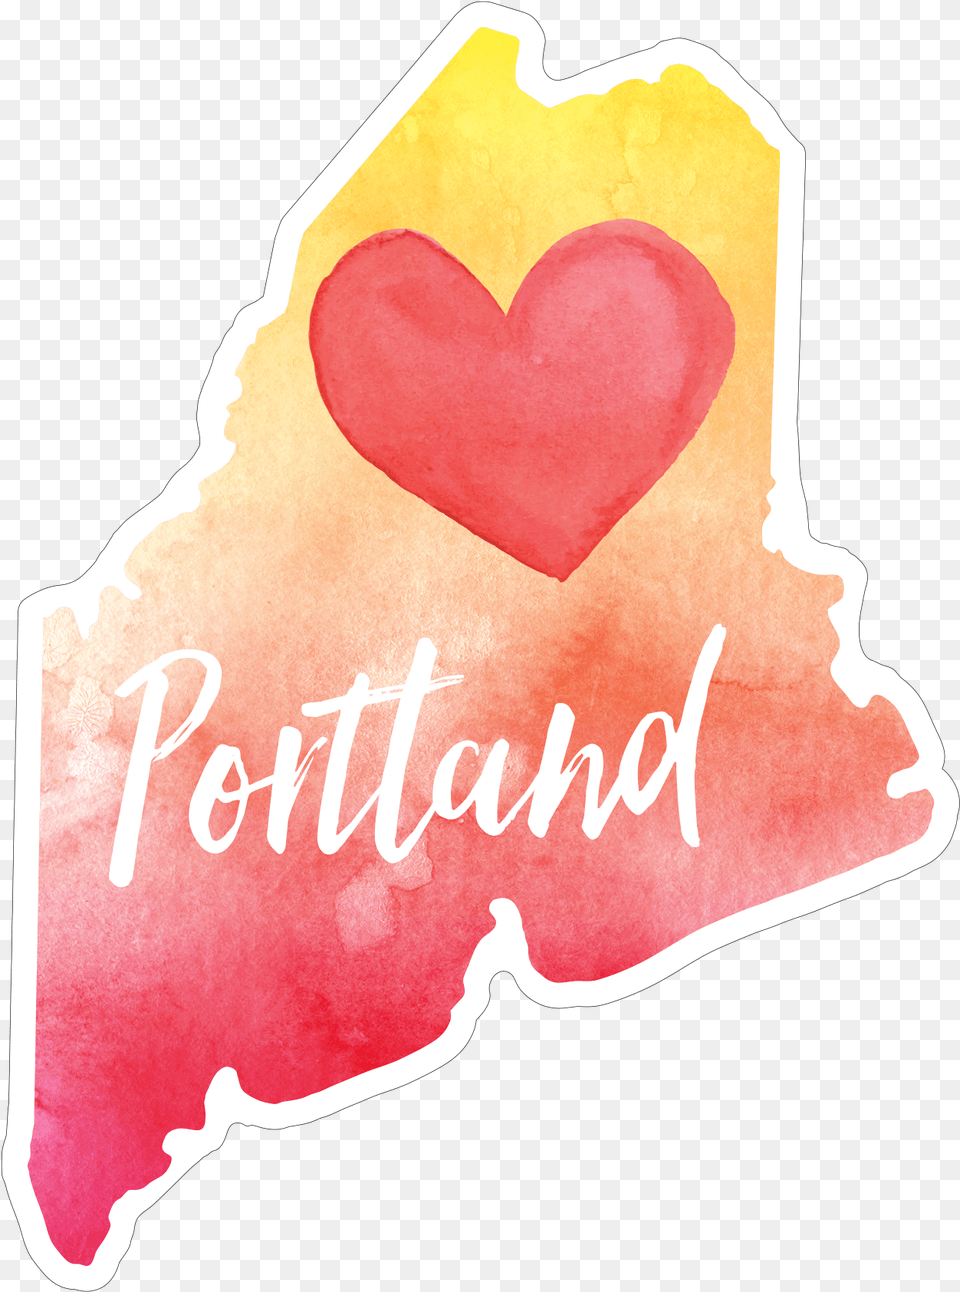 Watercolor Heart Maine Illustration Png Image